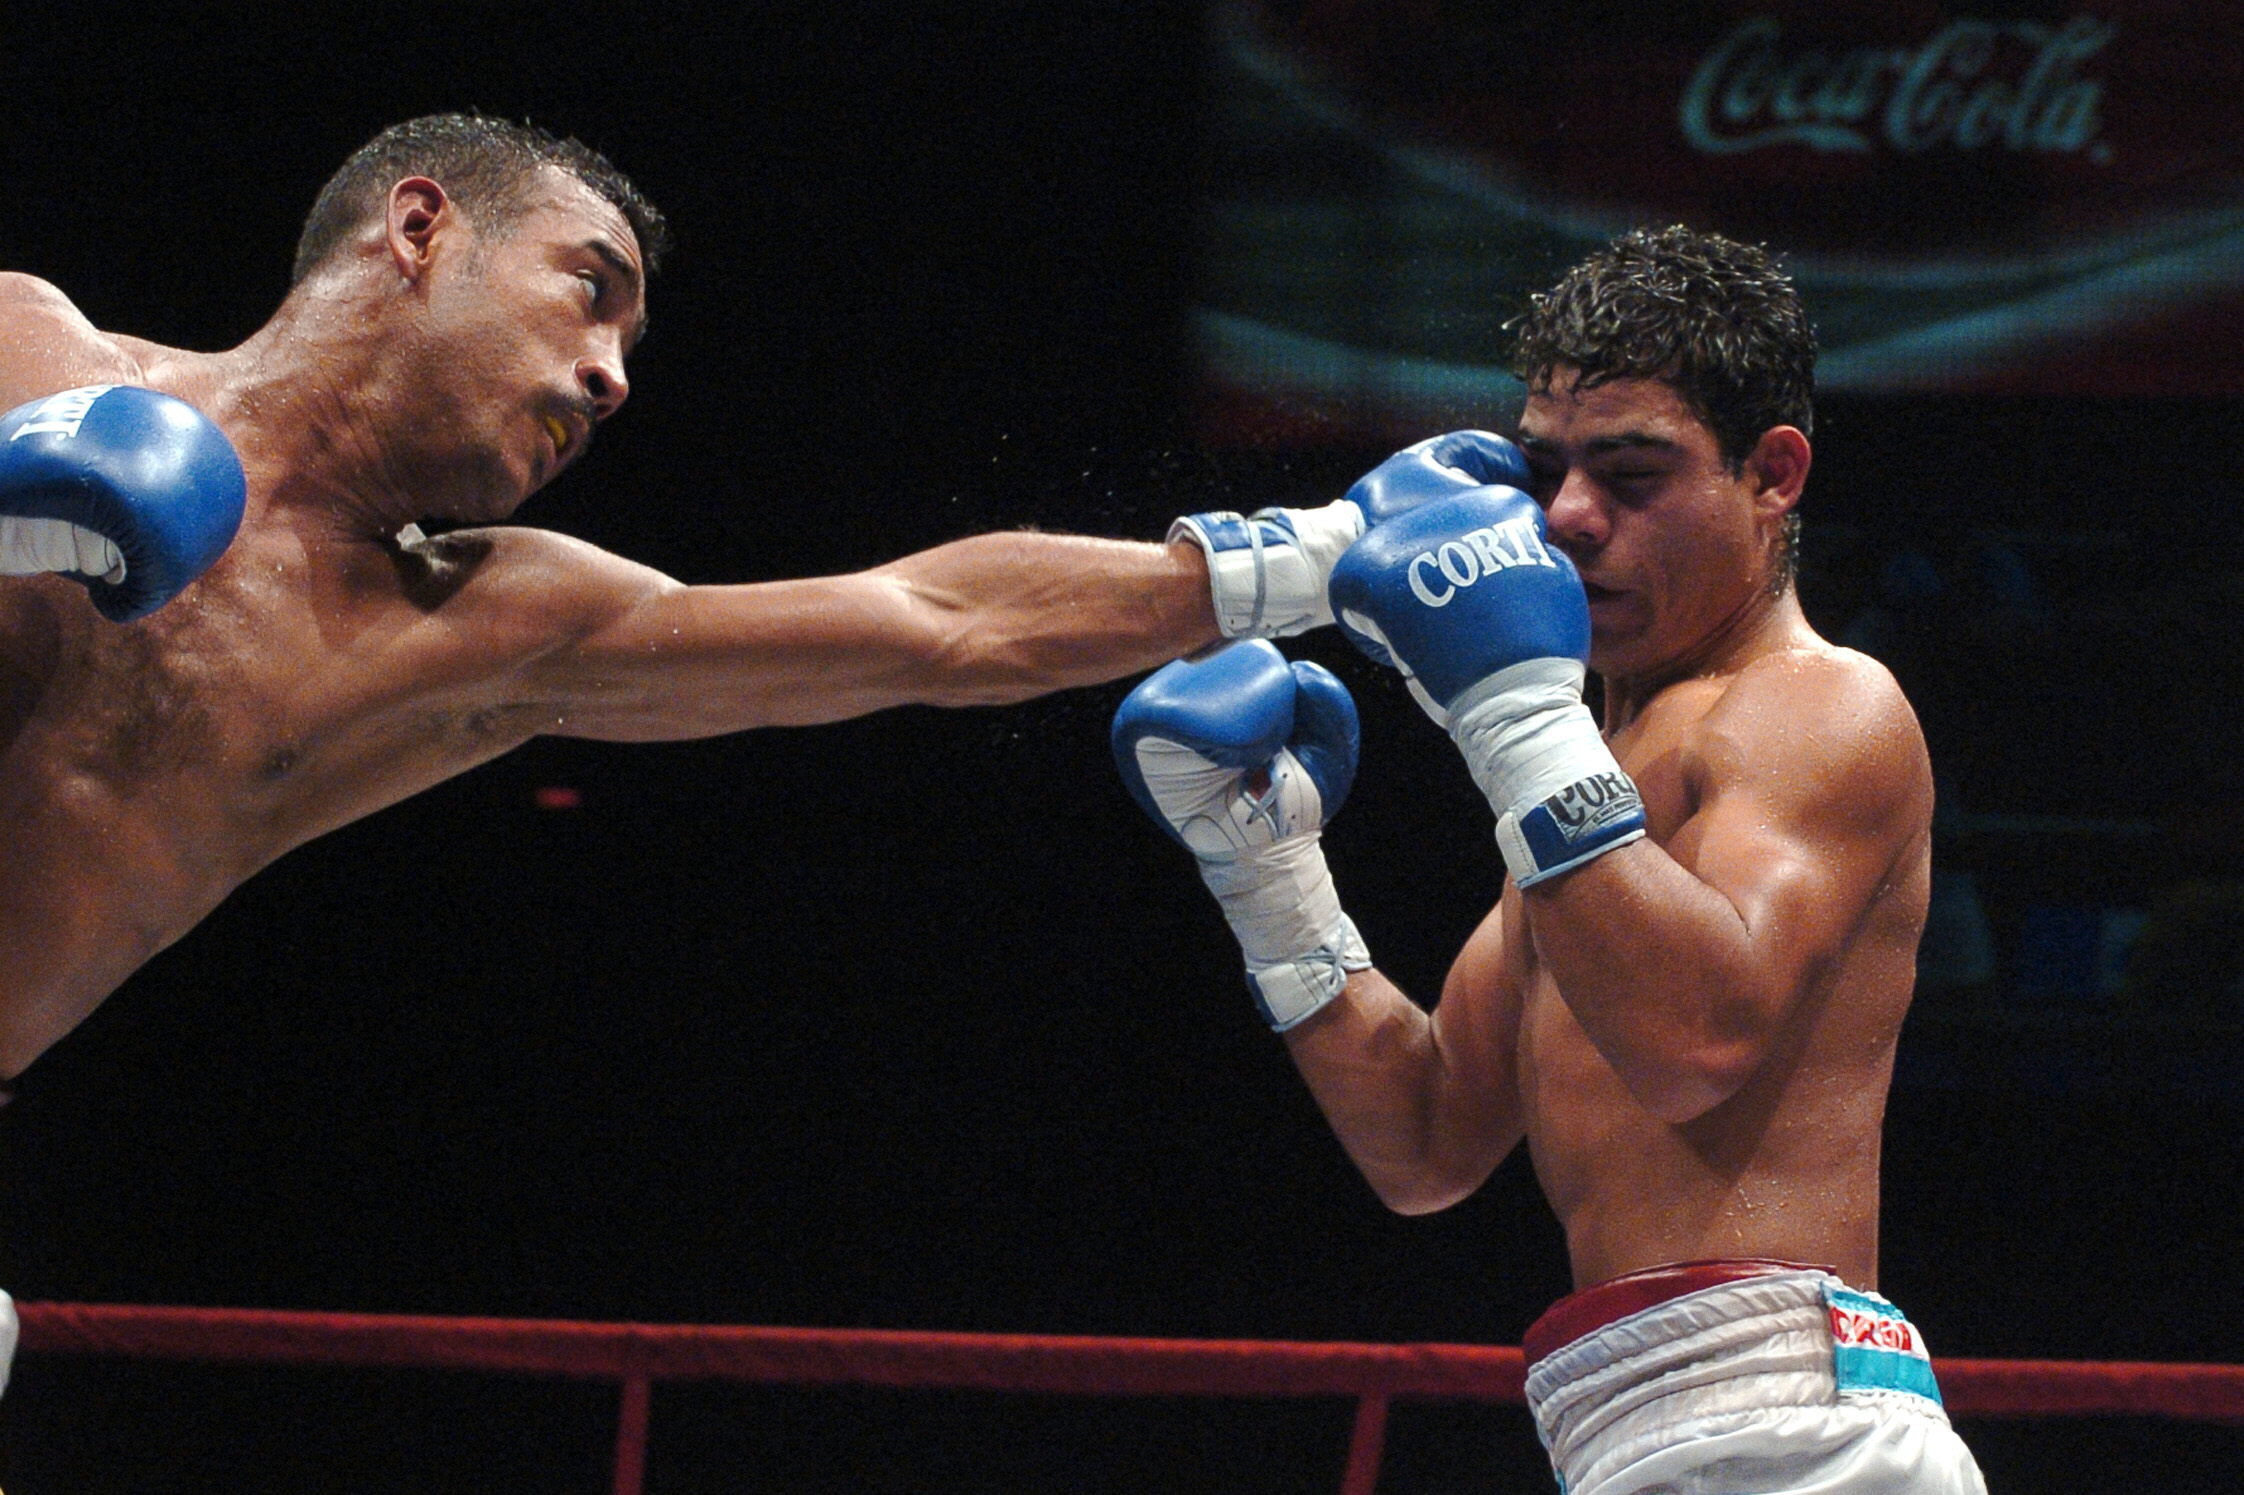 Venezuela's boxer Alexander Muñoz (left) fighting against Julio Ler (right) during a play-off fight in Luna Park, Buenos Aires, Argentina. May 26, 2005.